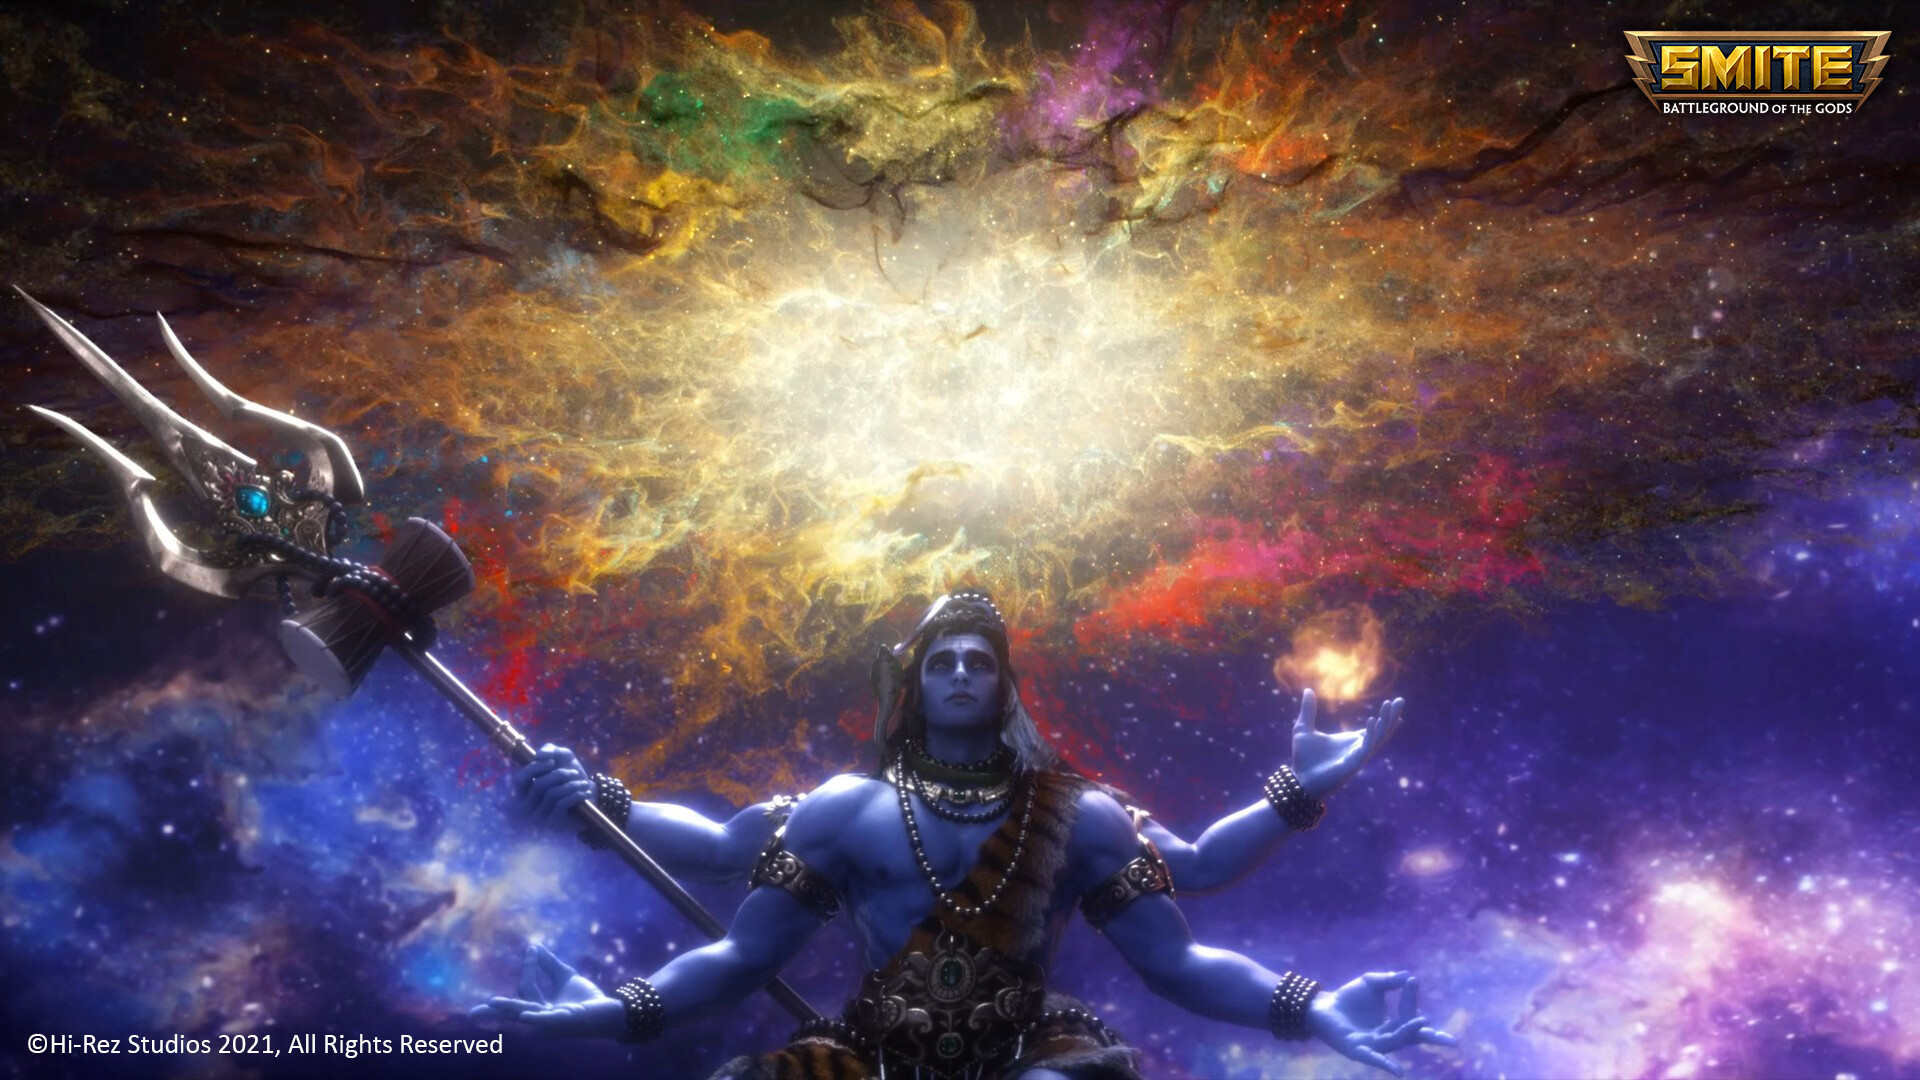 Incredible Compilation of 999+ High-Quality Lord Shiva HD Images in Full 4K